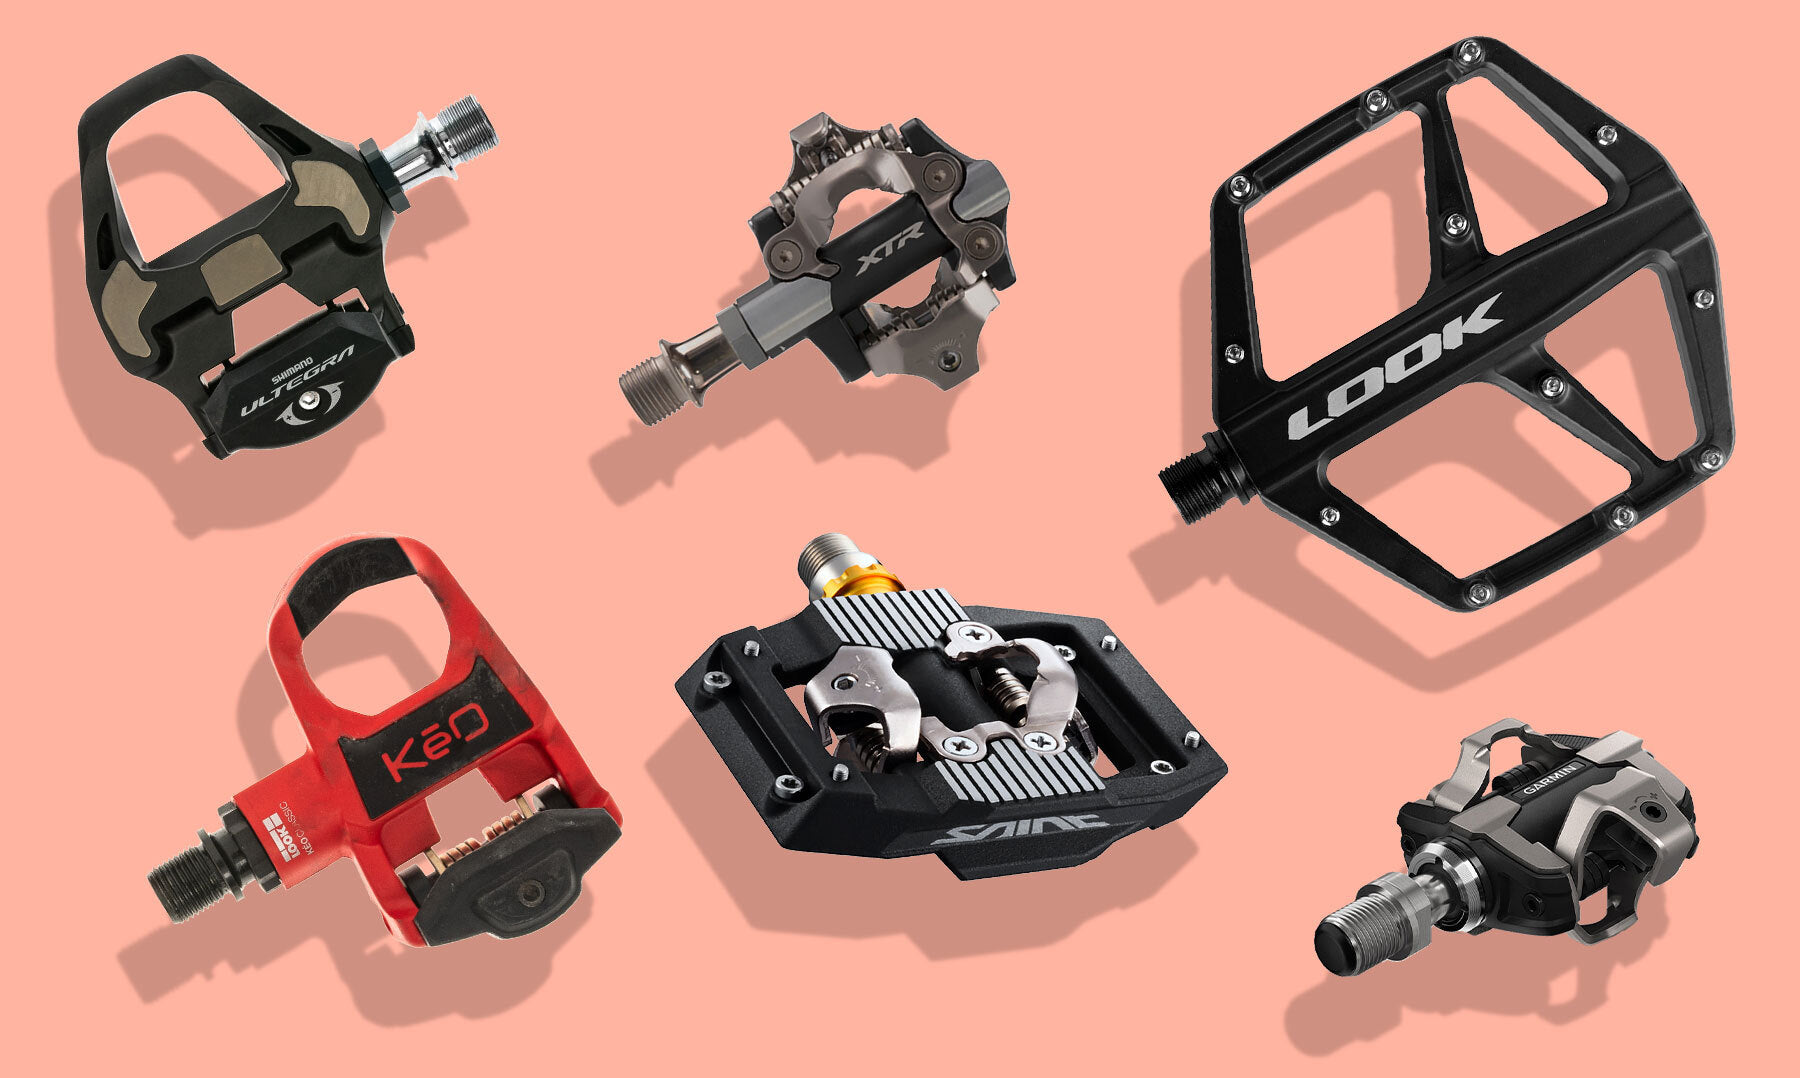 Choosing the right bike pedals